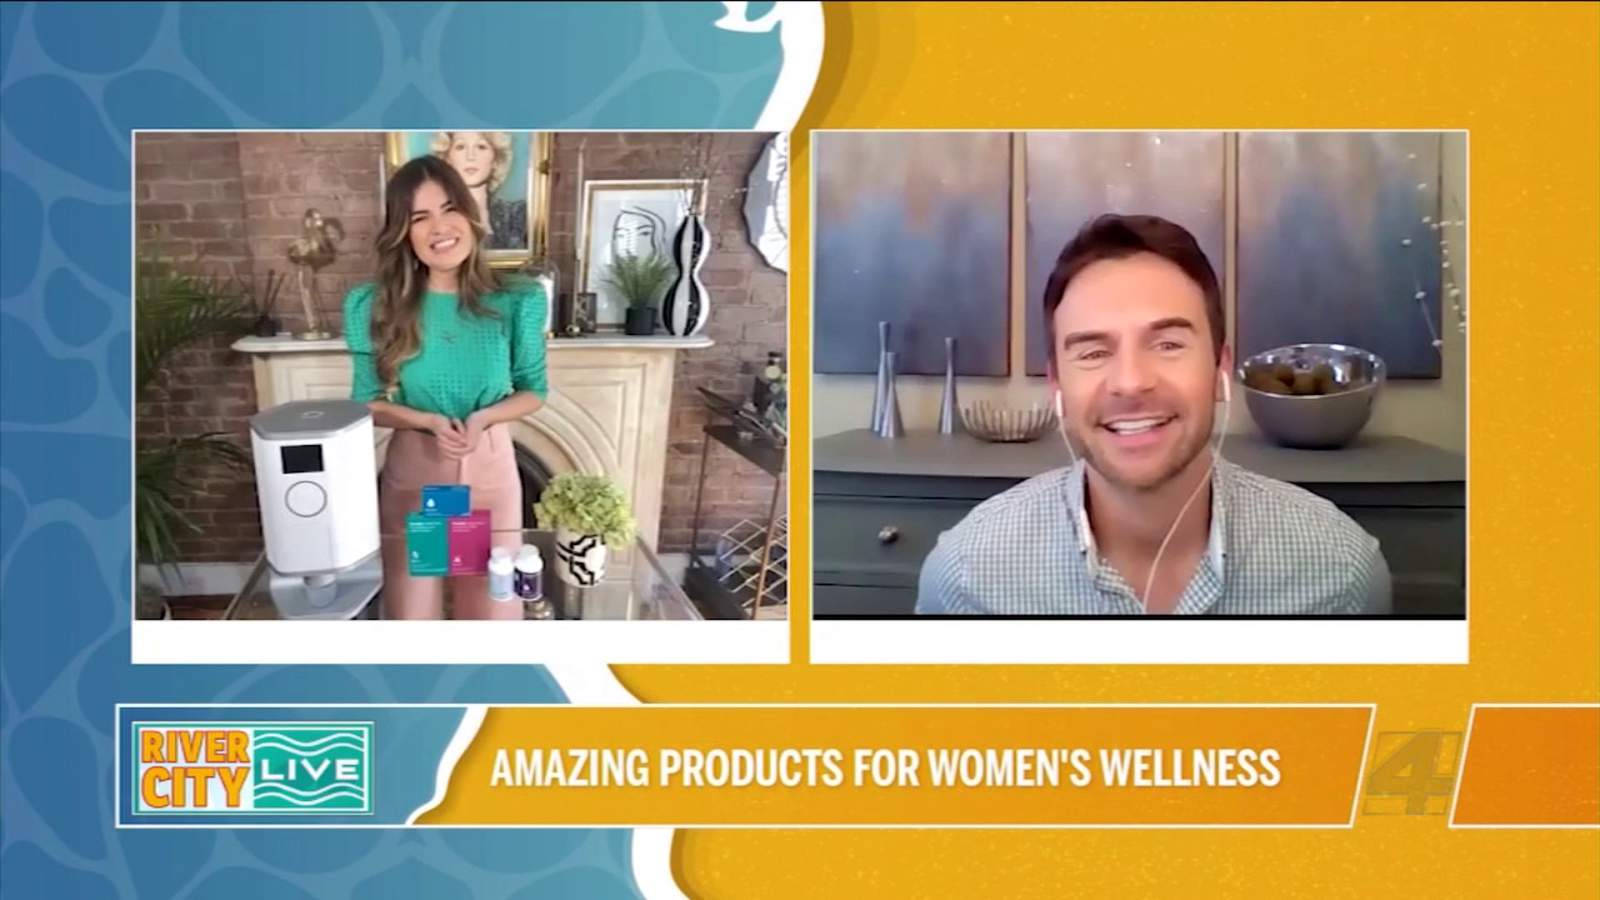 Lifestyle expert shares some women’s wellness favorites